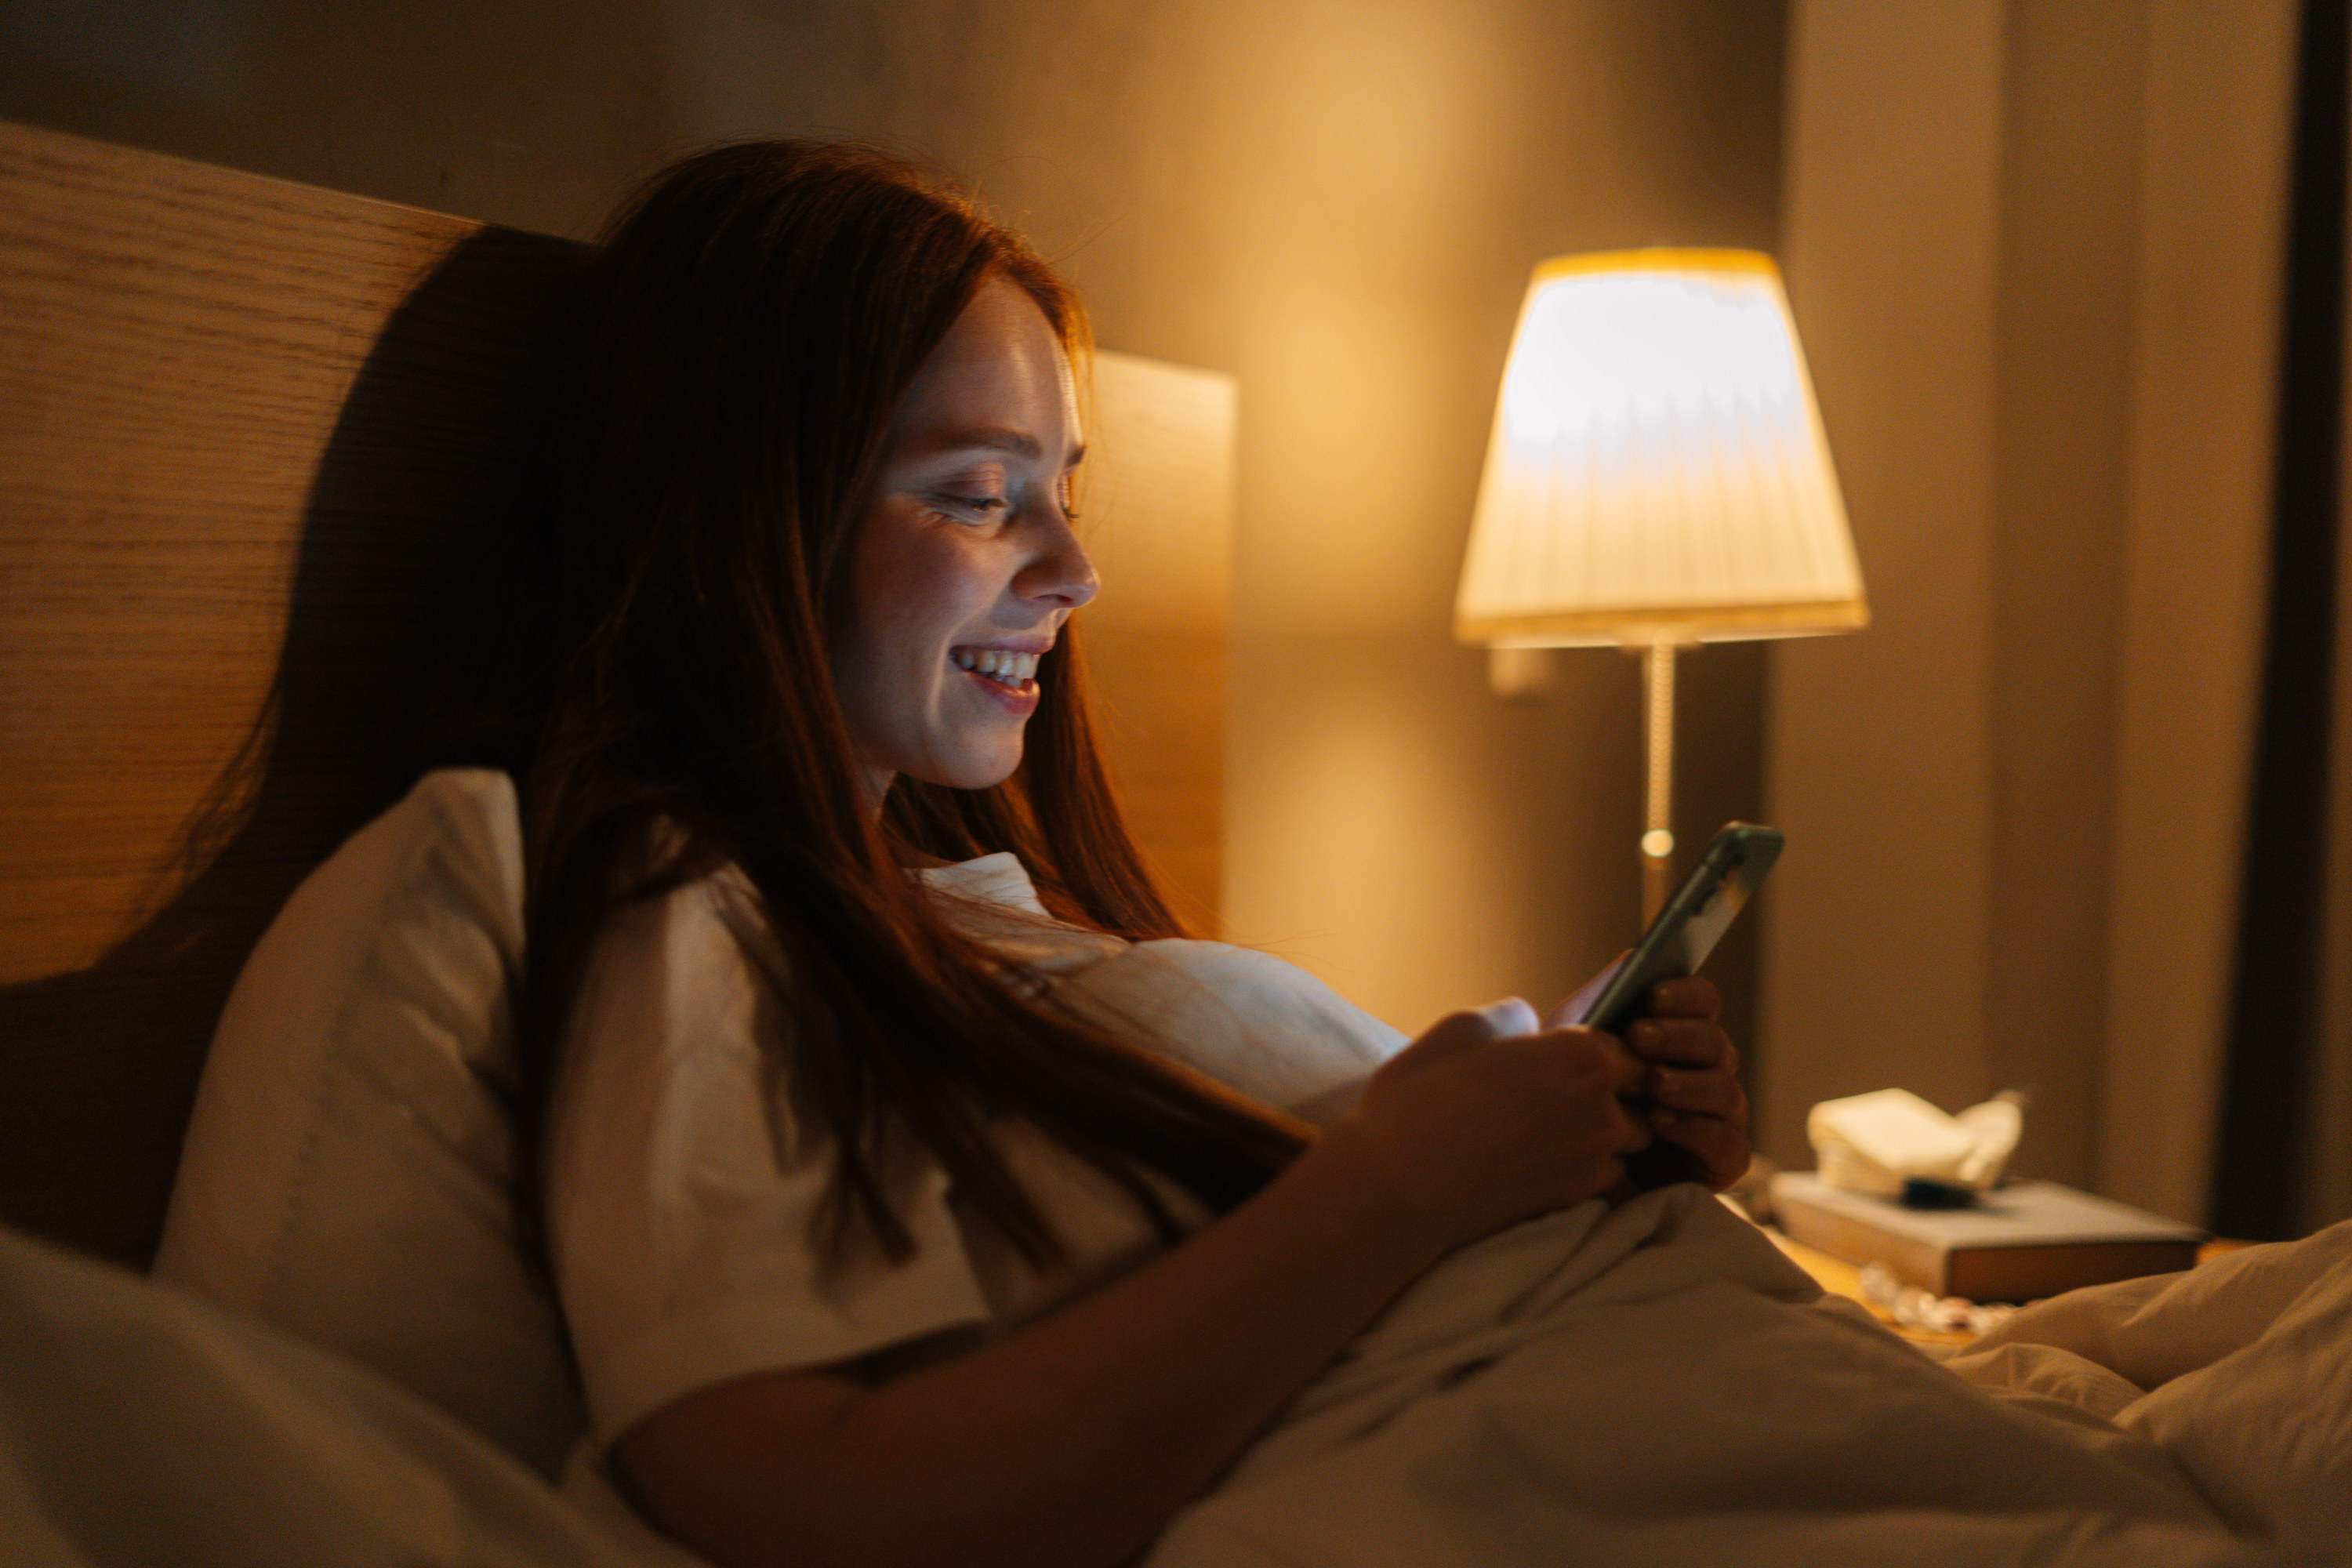 A woman texting on her phone in bed